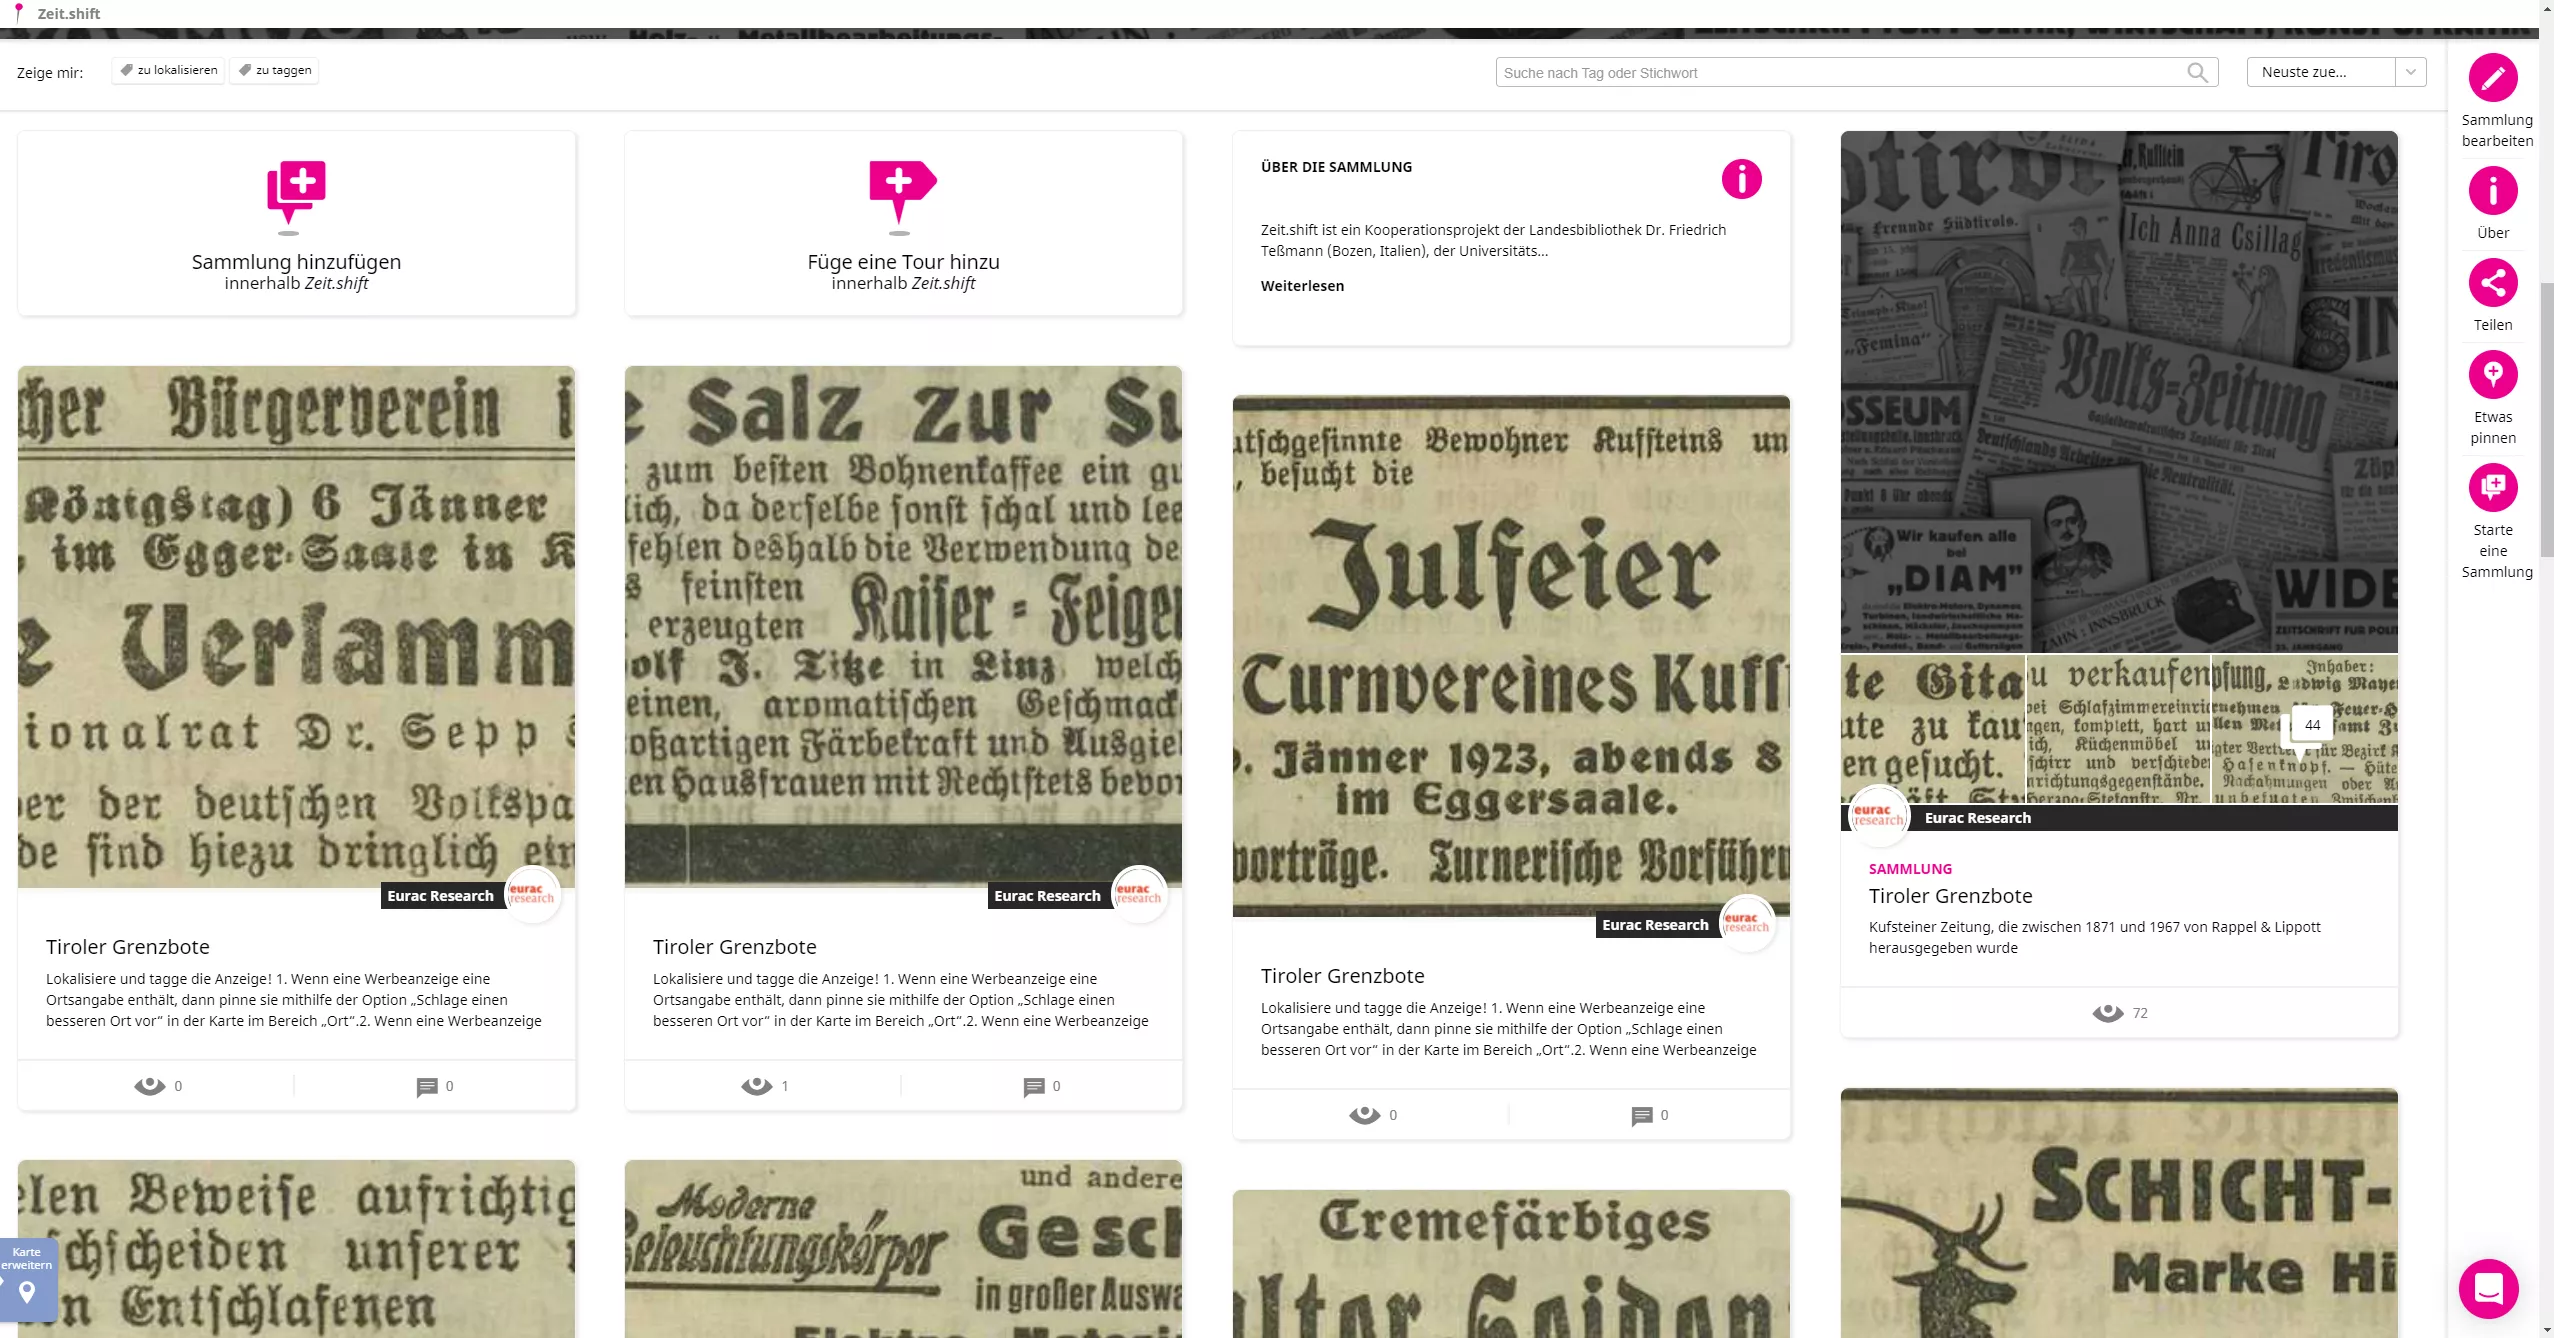 Gallery page of the Zeit.shift collection listing an information card, subcollections and individual adverts.